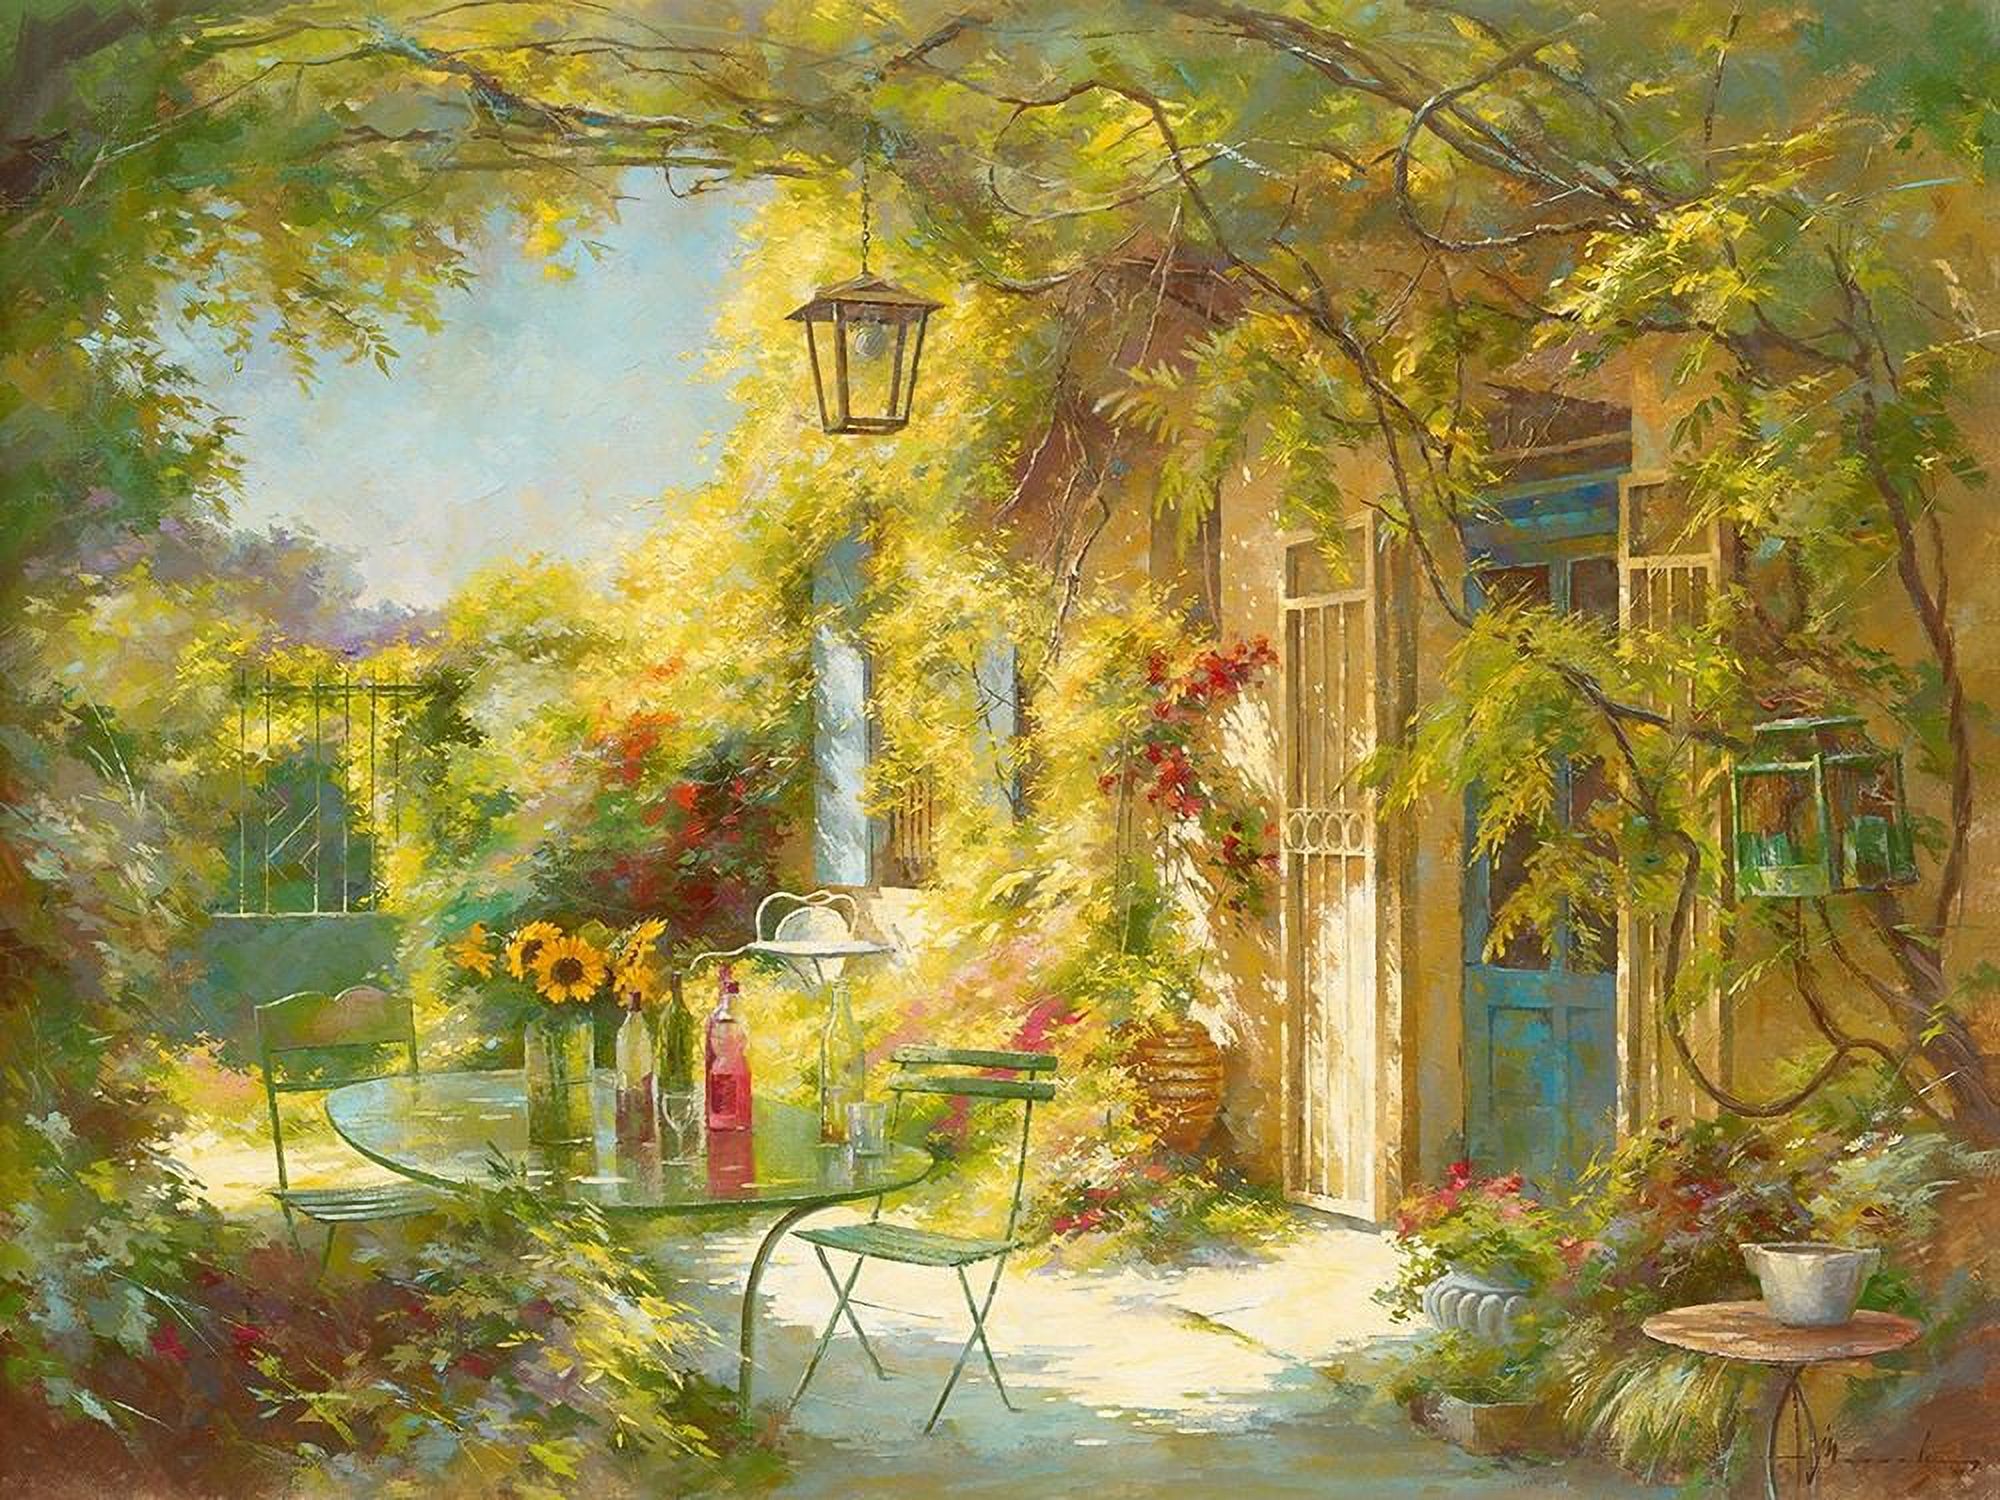 L apero chez les amis by Johan Messely (24 x 18) - image 1 of 1